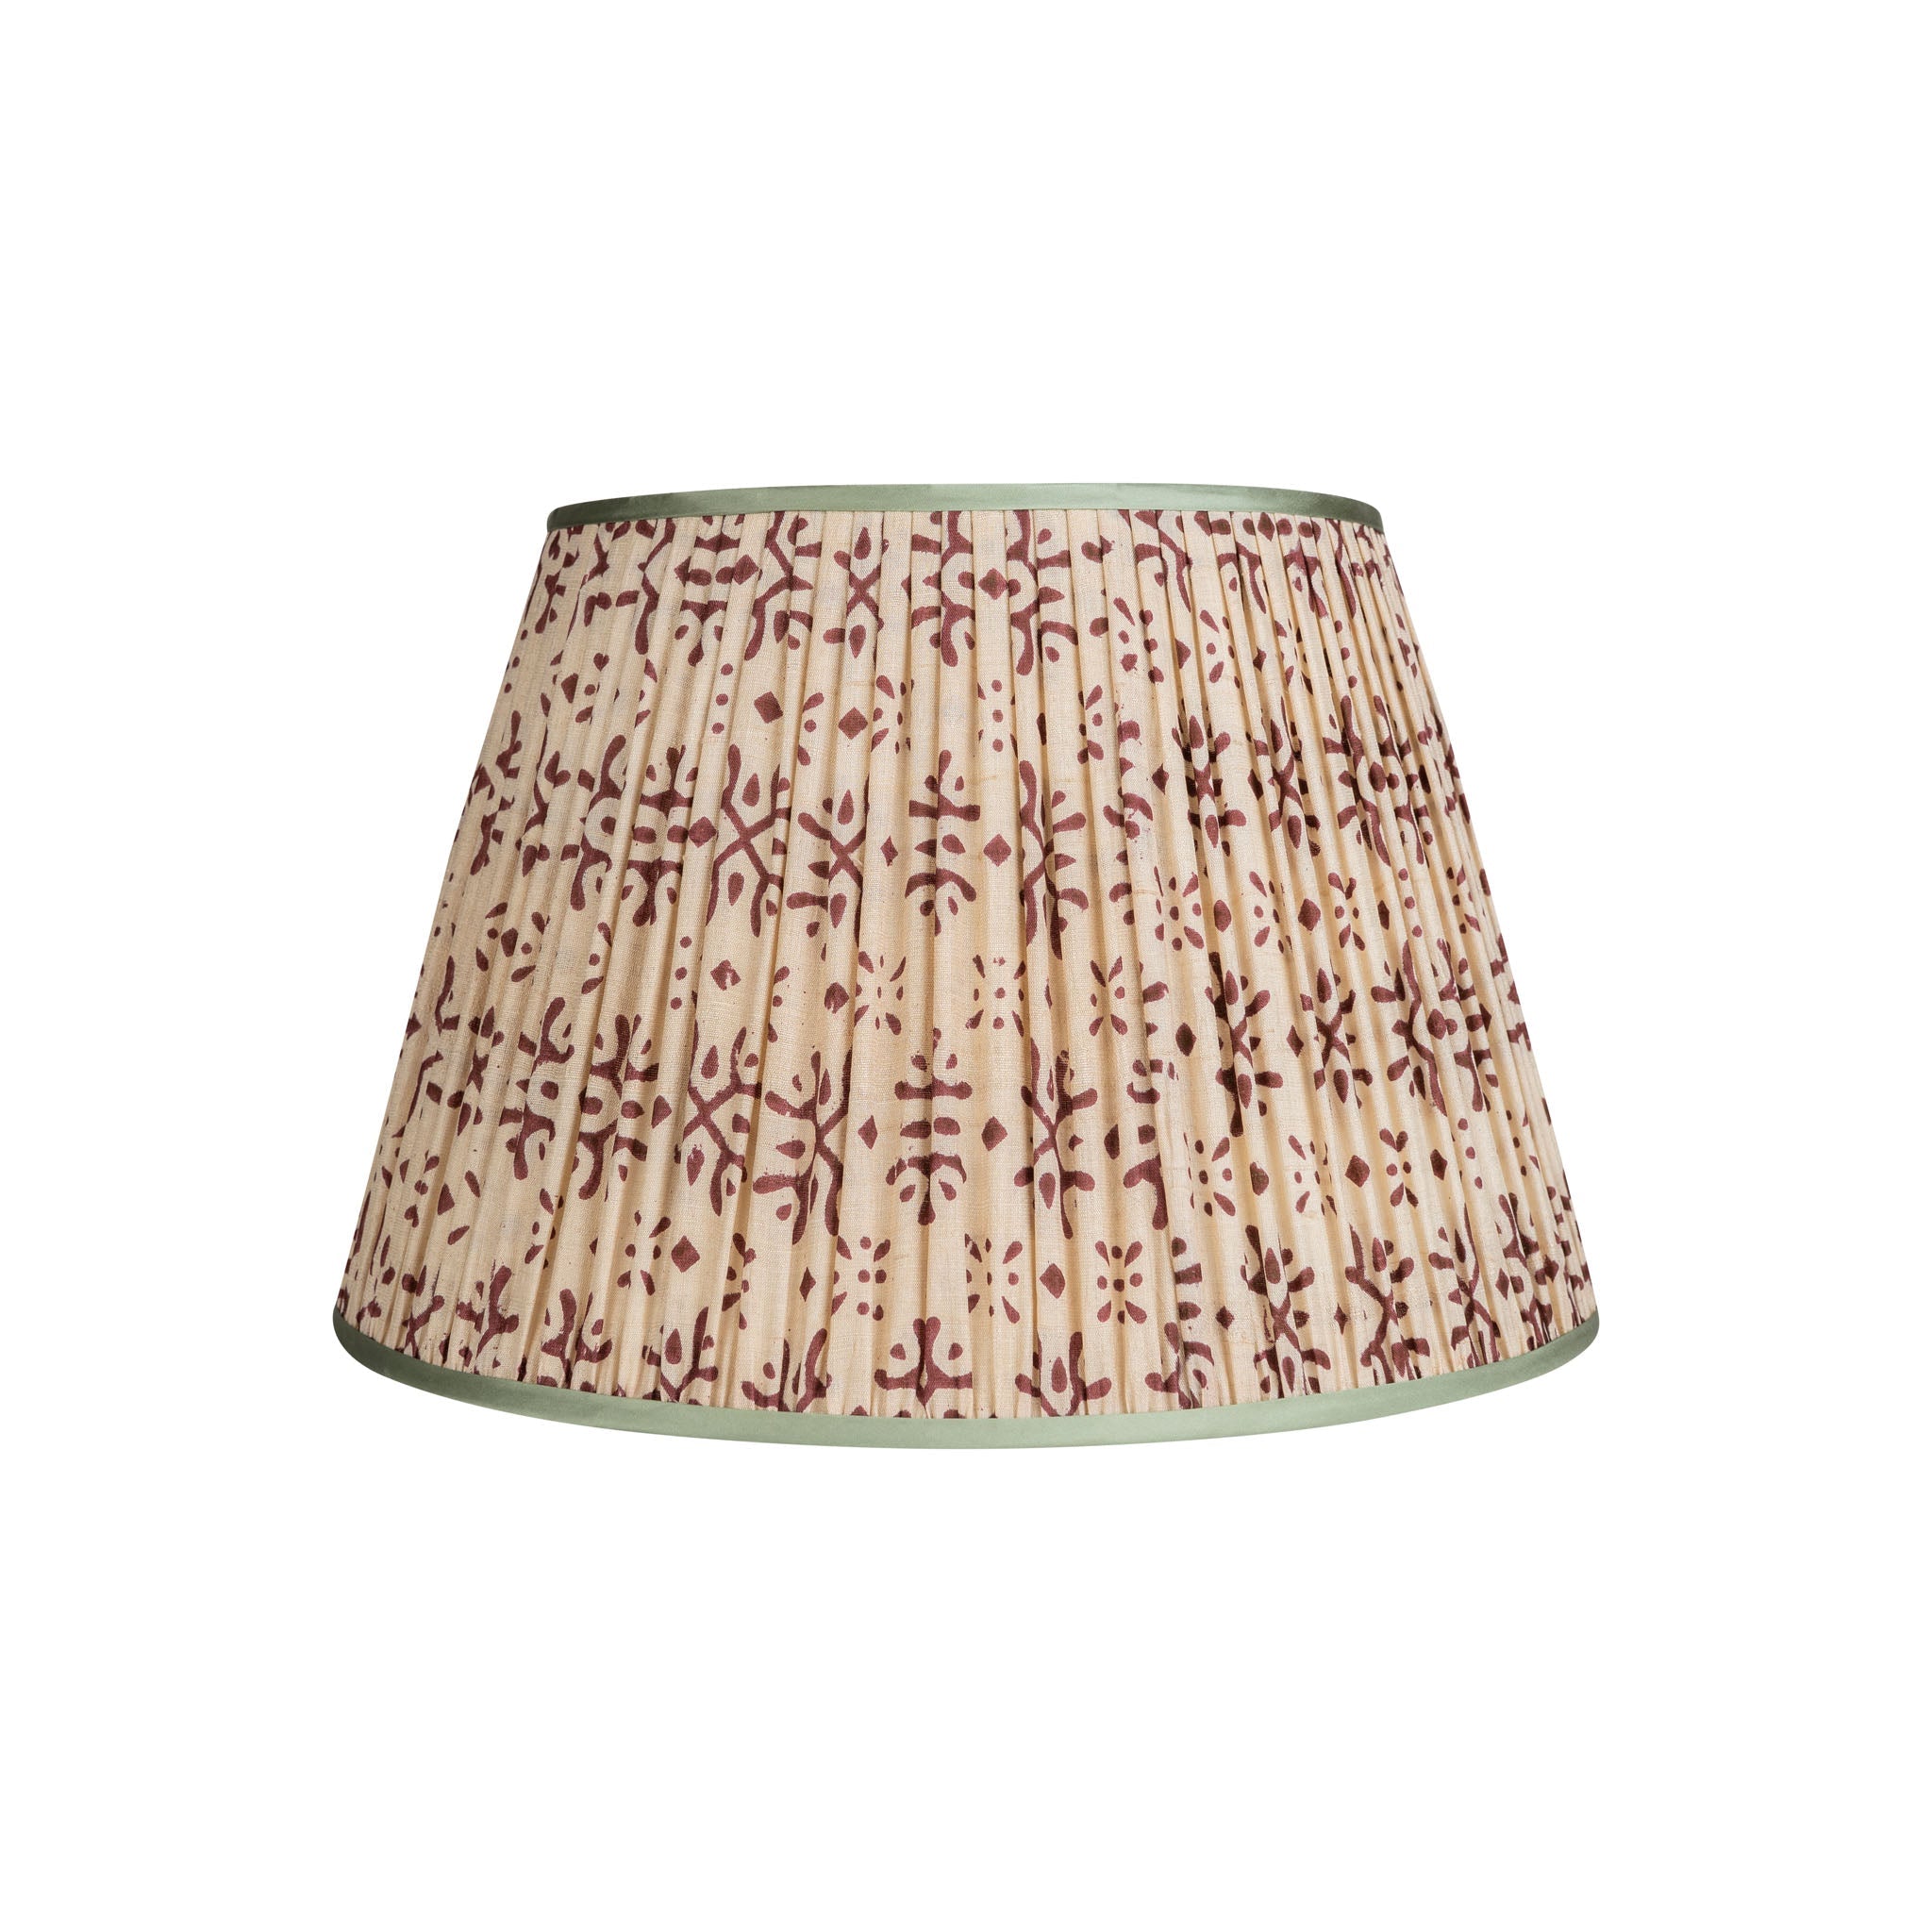 Cream and Plum Patterned Pleated Silk Lampshade with Mint Trim